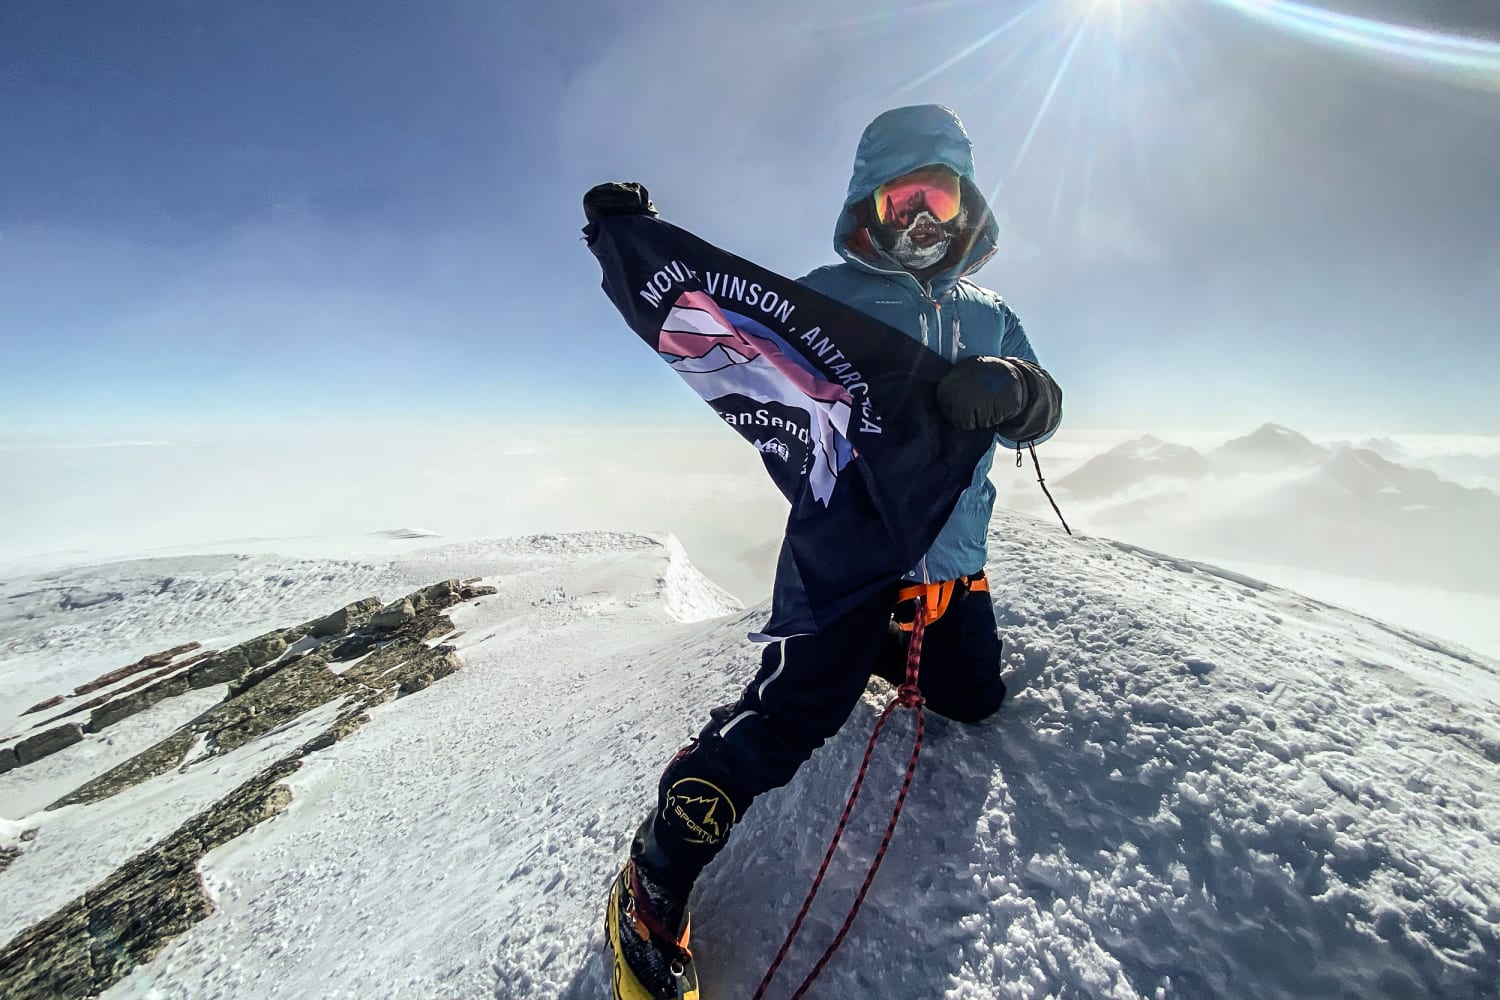 Meet the mountaineer flying the trans Pride flag on the worlds highest peaks image